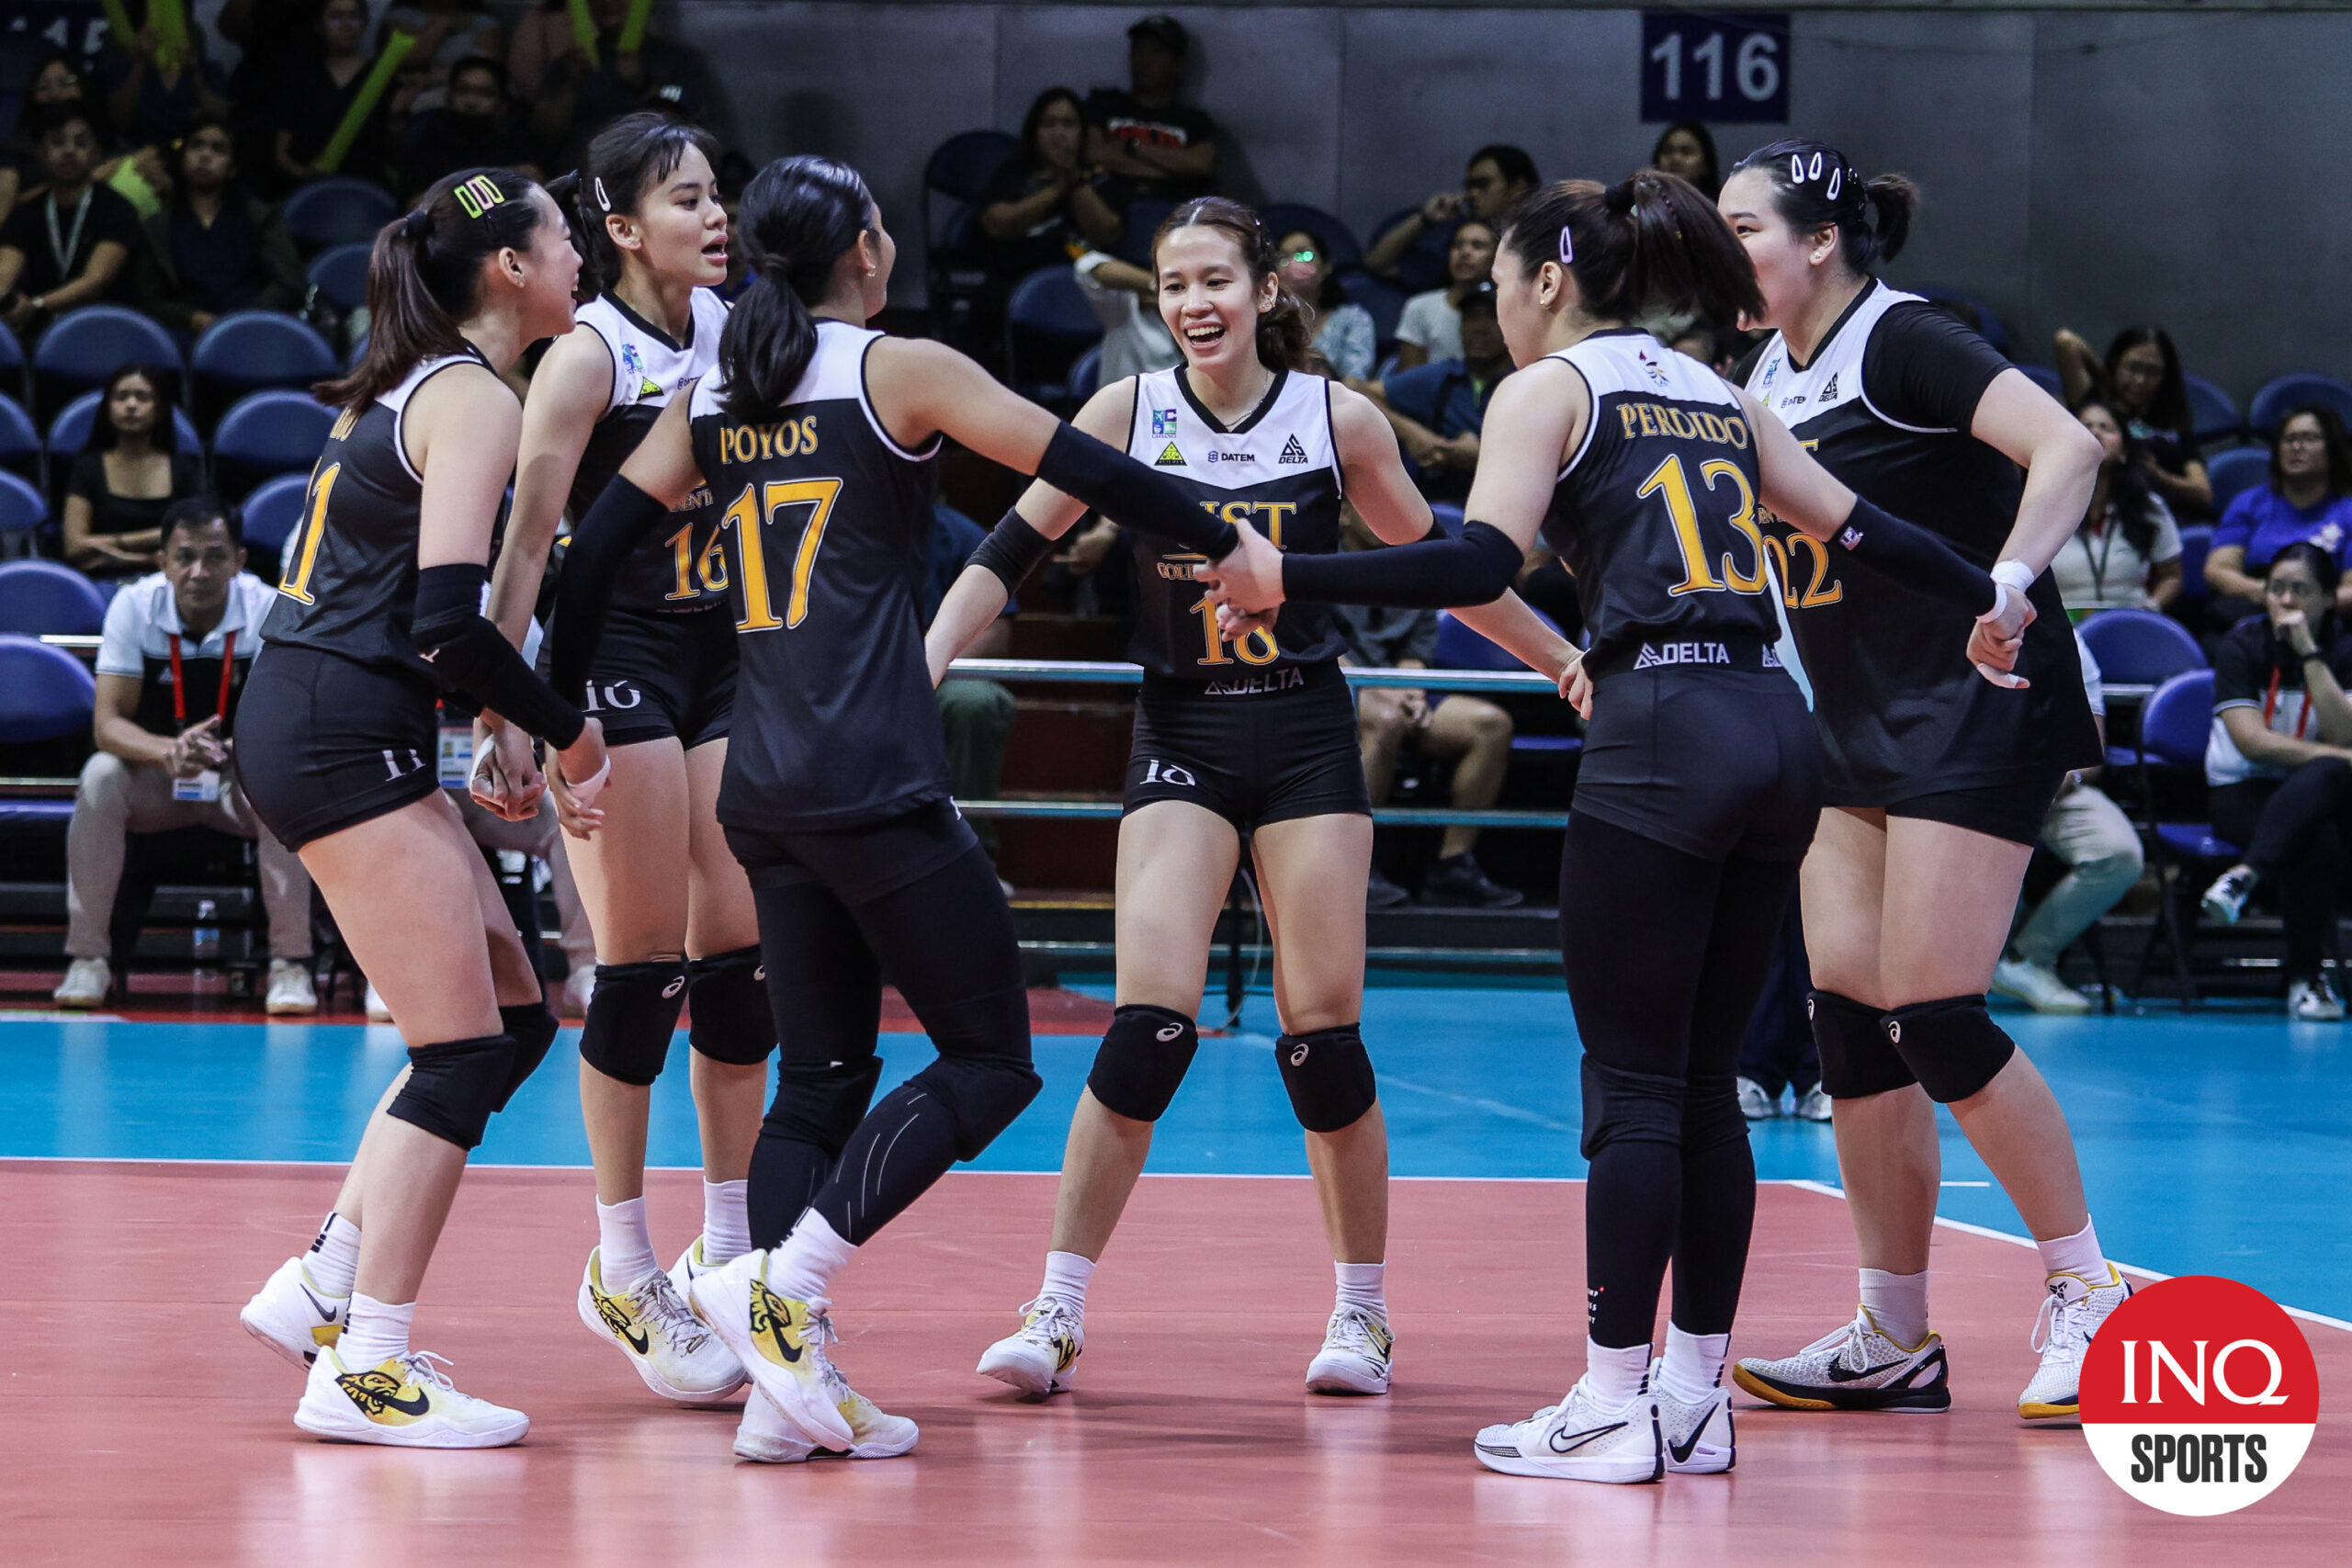 UST Tigresses, led by Angge Poyos, survives Ateneo's fight back in the UAAP Season 86 women's volleyball tournament. –MARLO CUETO/INQUIREr.bet